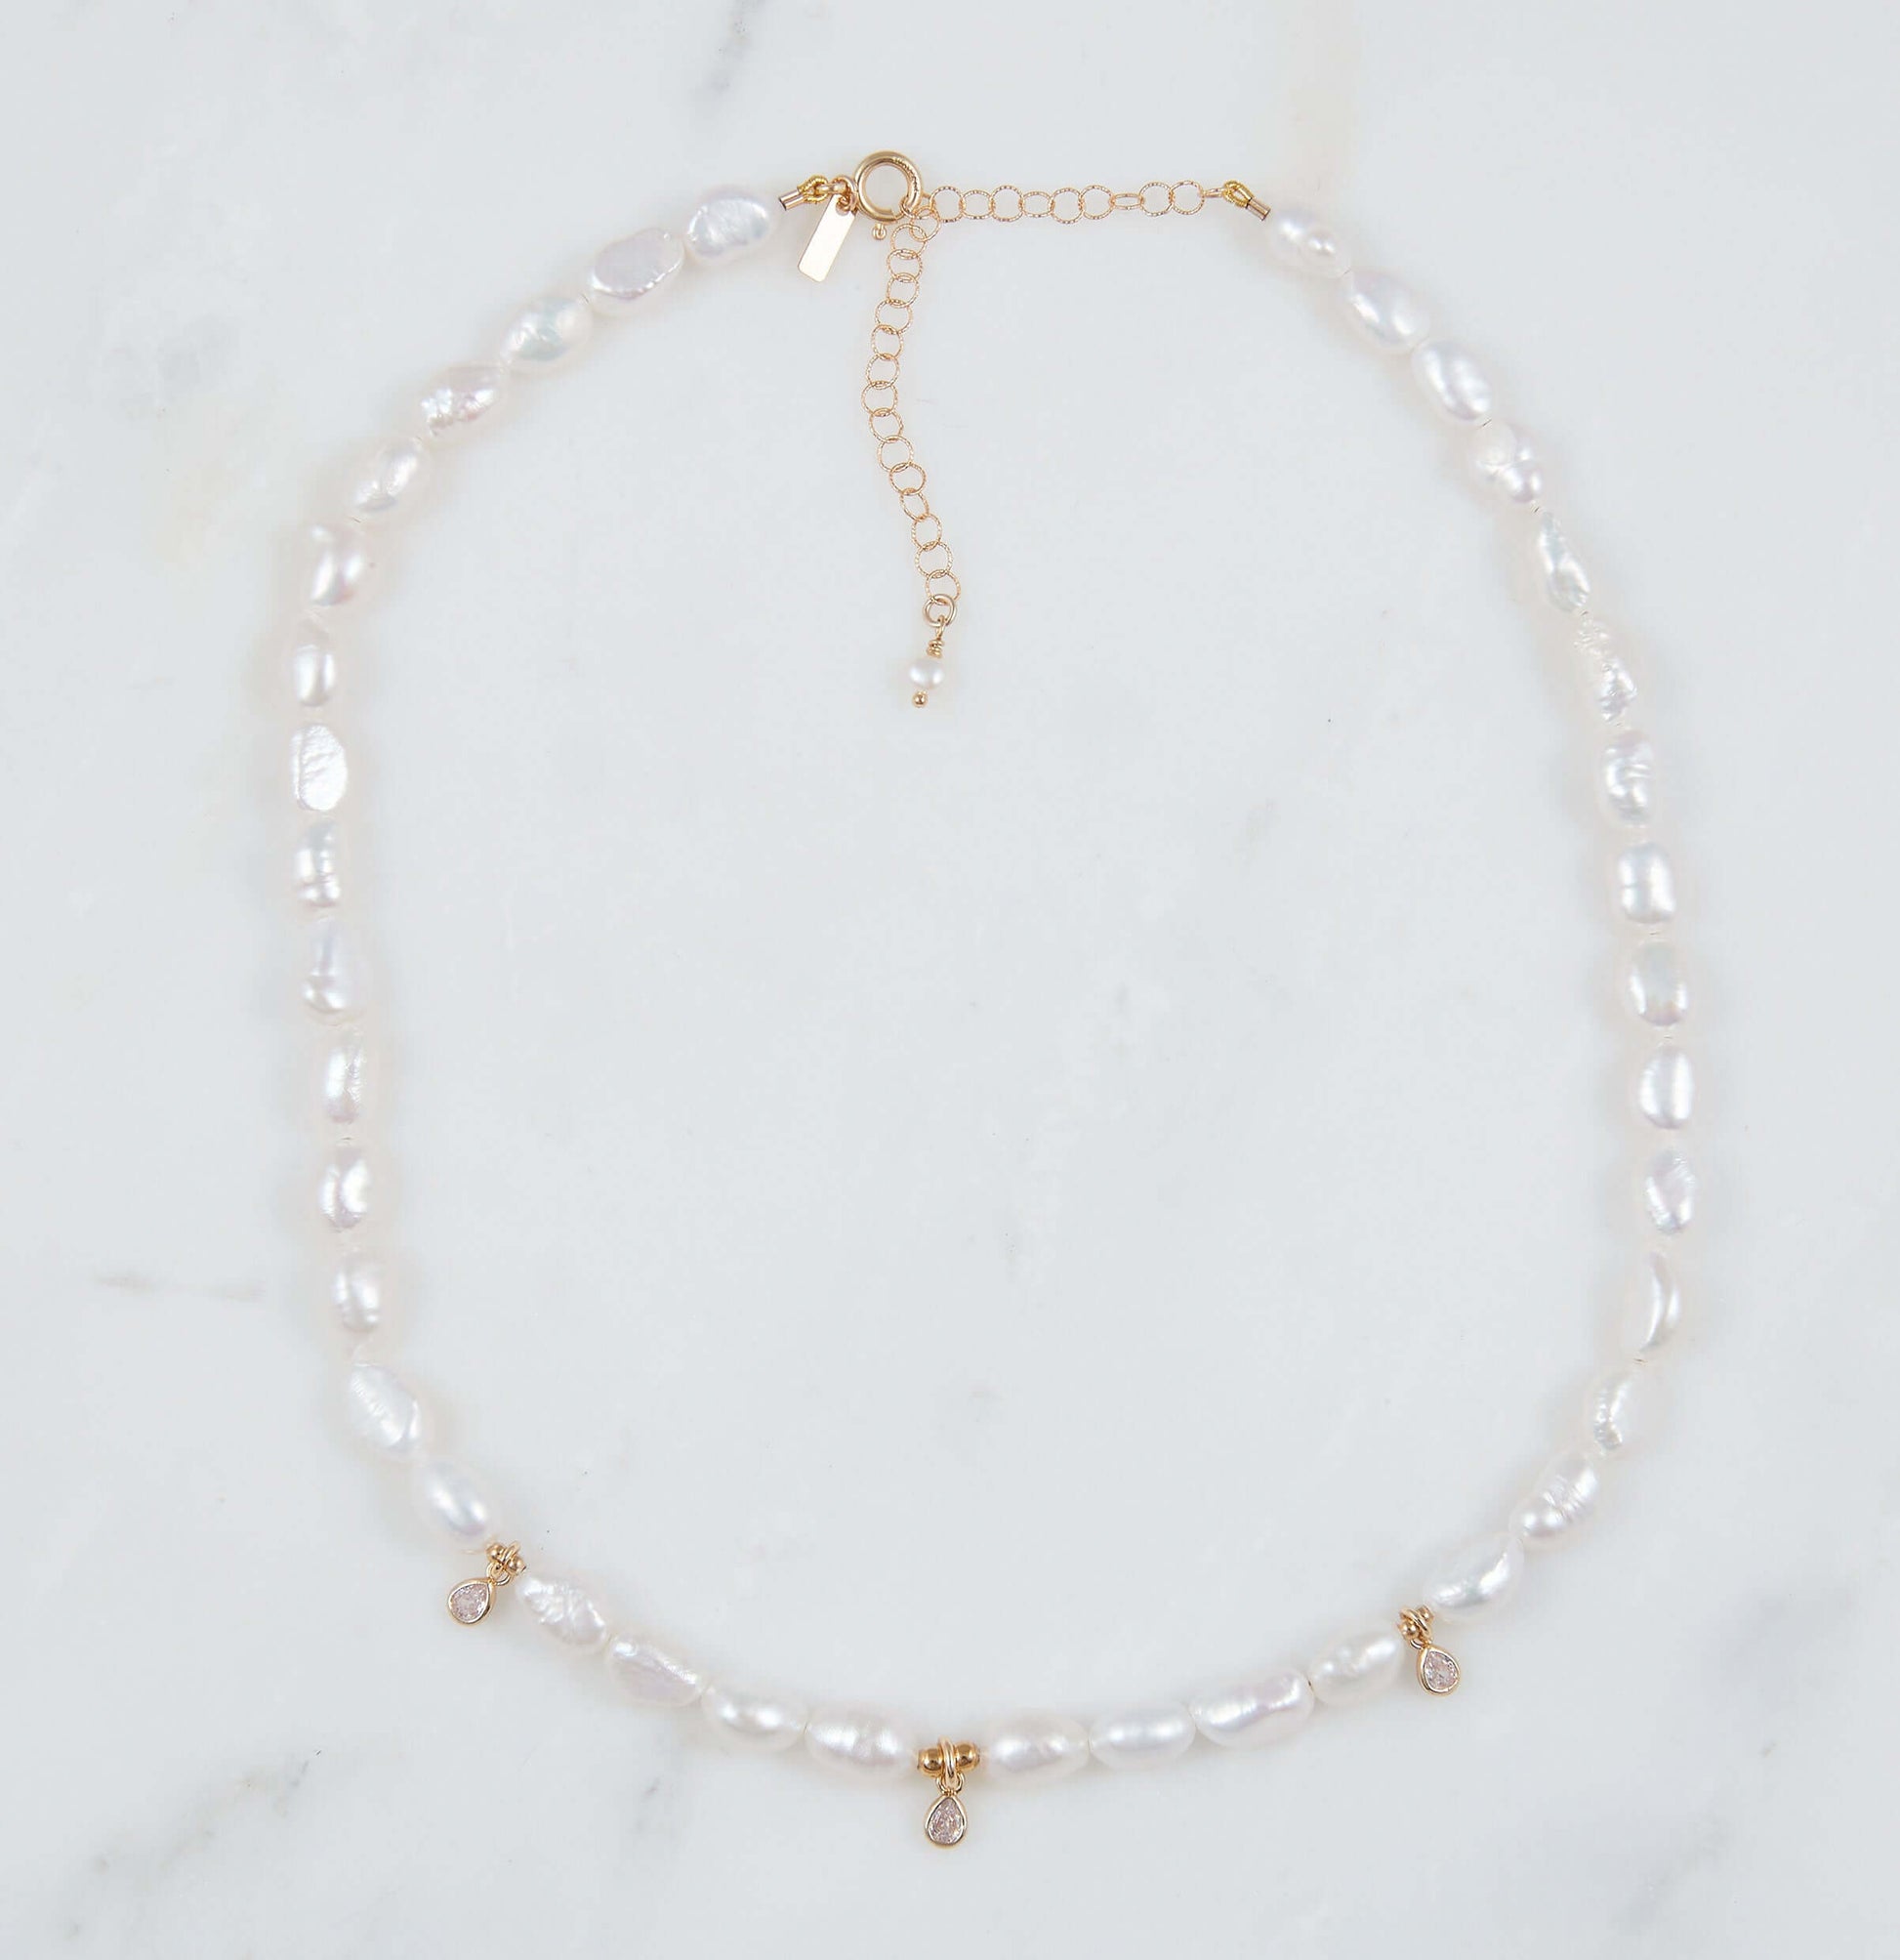 Sorrento Necklace, Freshwater Pearls 1